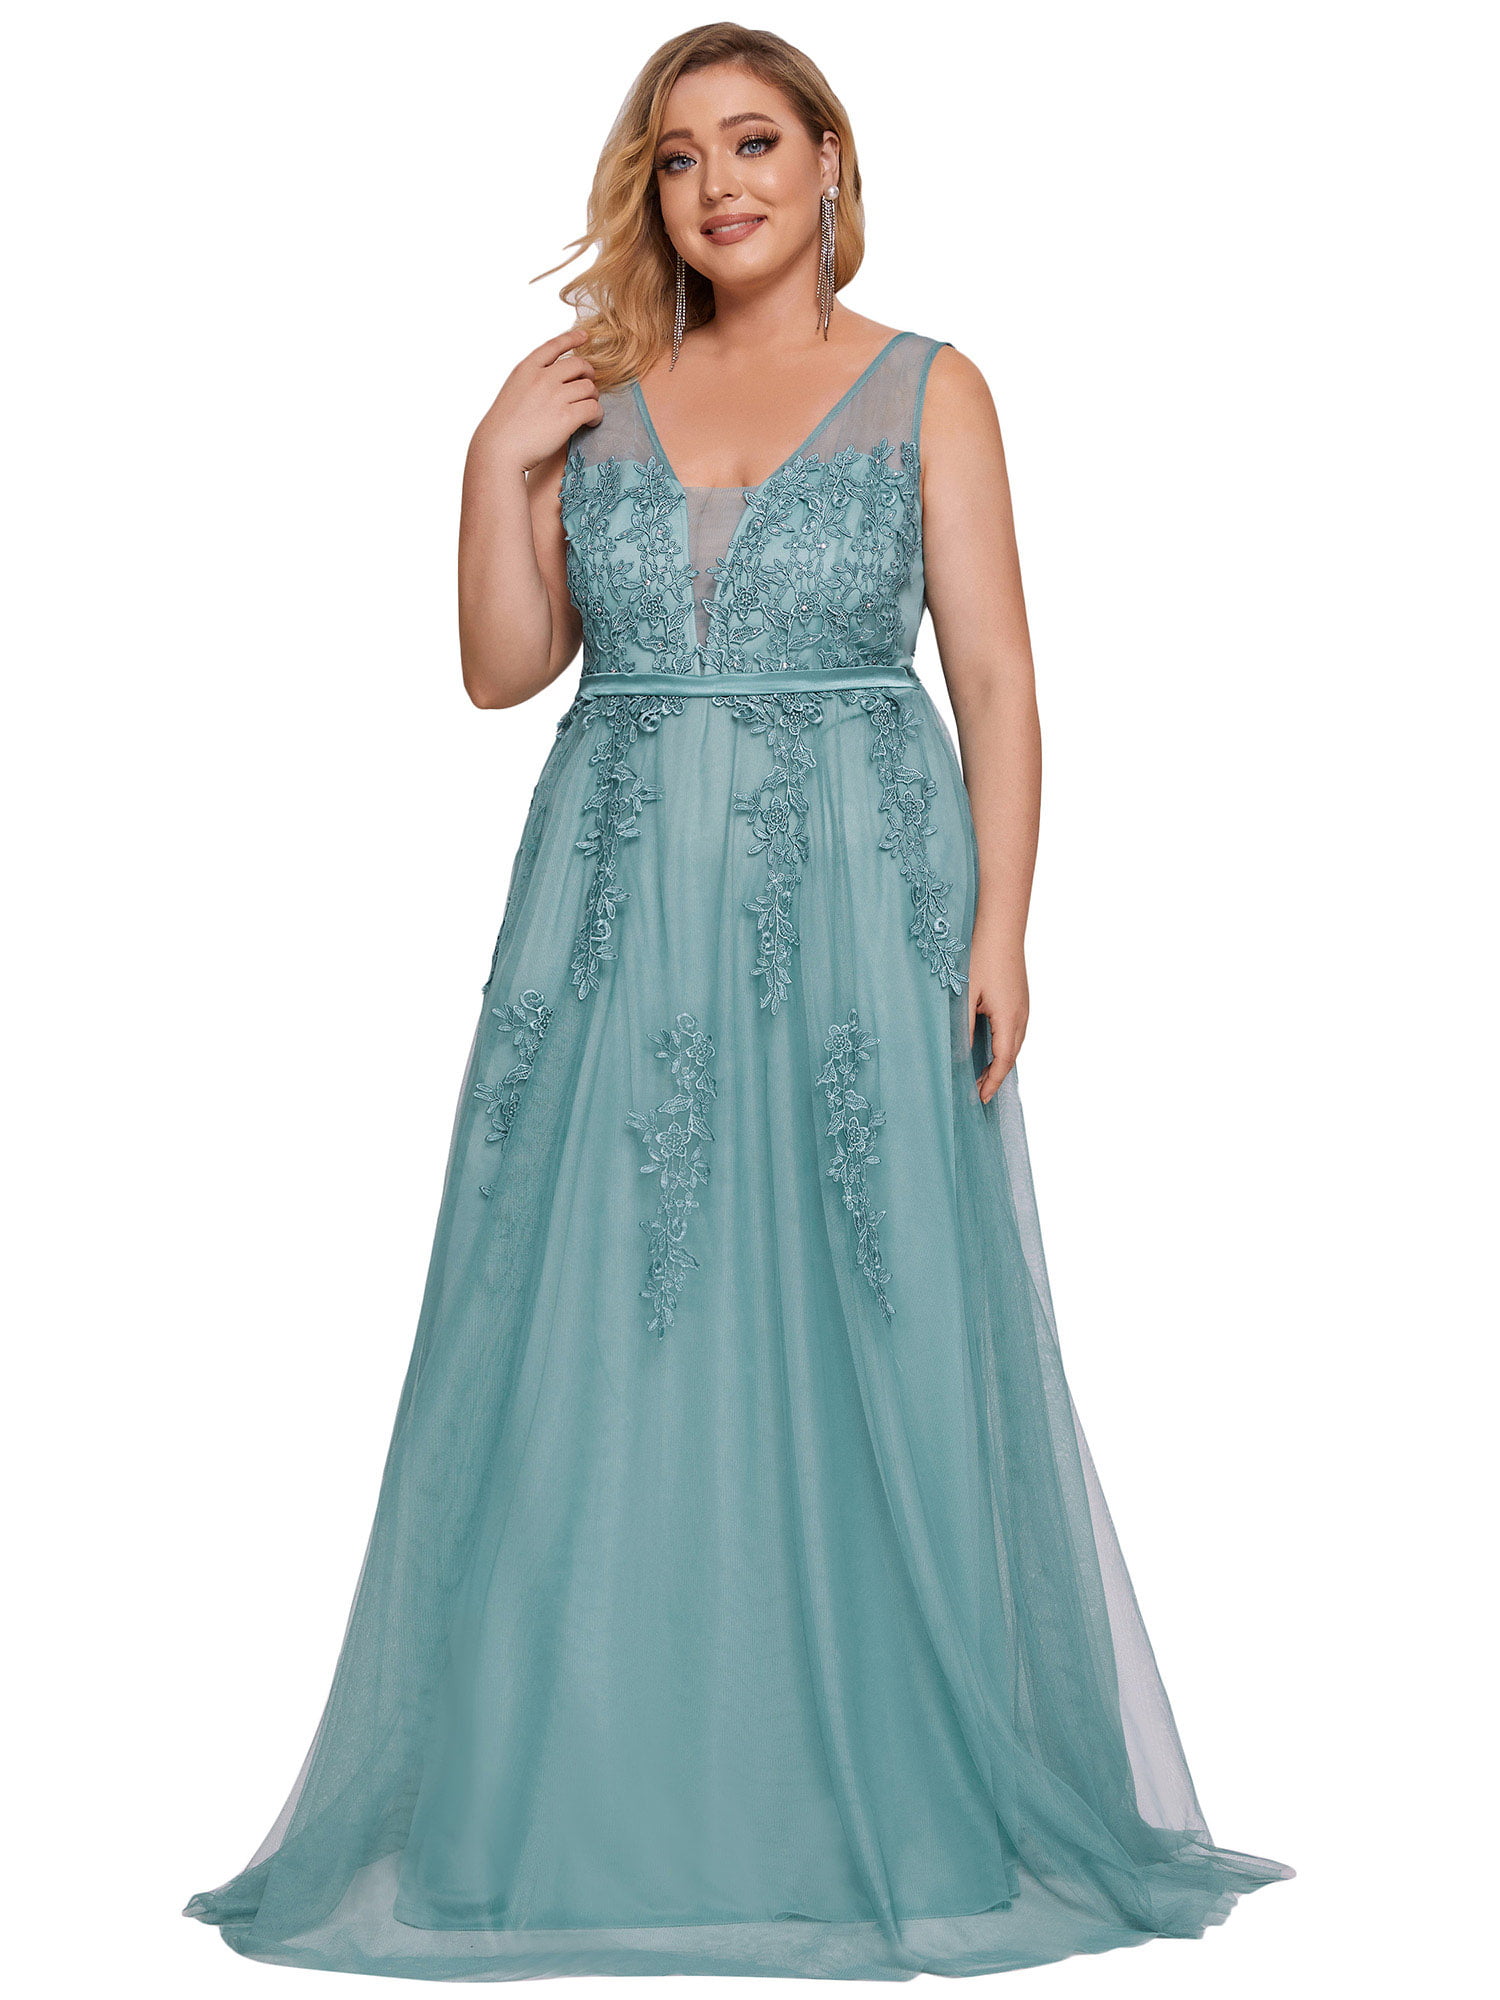 Womens Backless Lace Appliqued Satin Ruched Prom Dress Long Formal Evening Gowns with Pockets